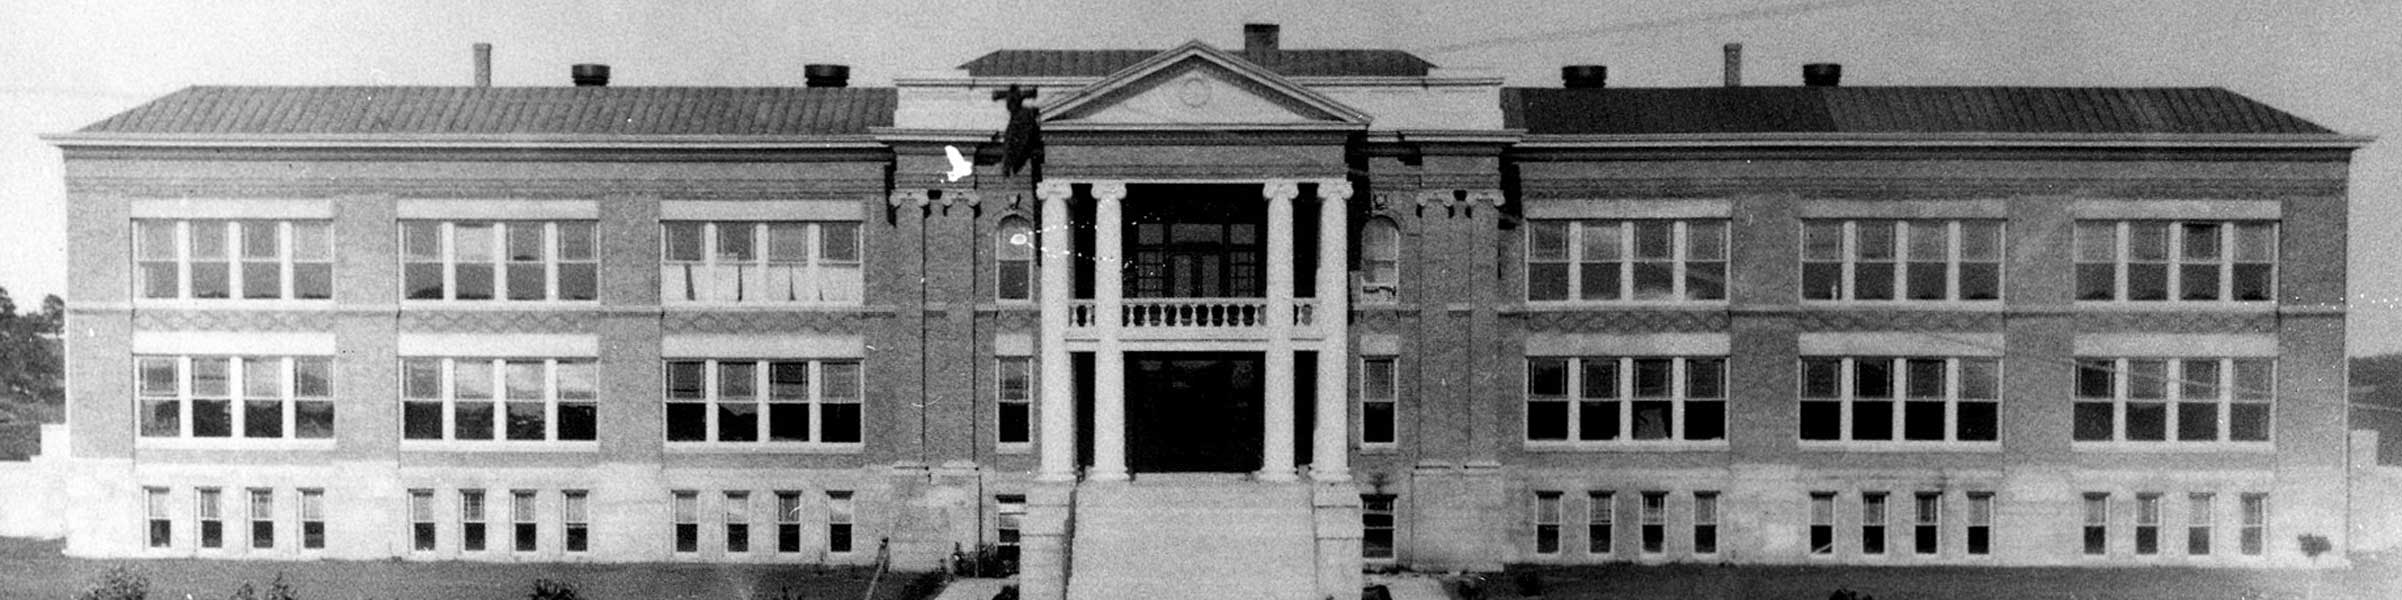 Photograph of Science Hall from 1911